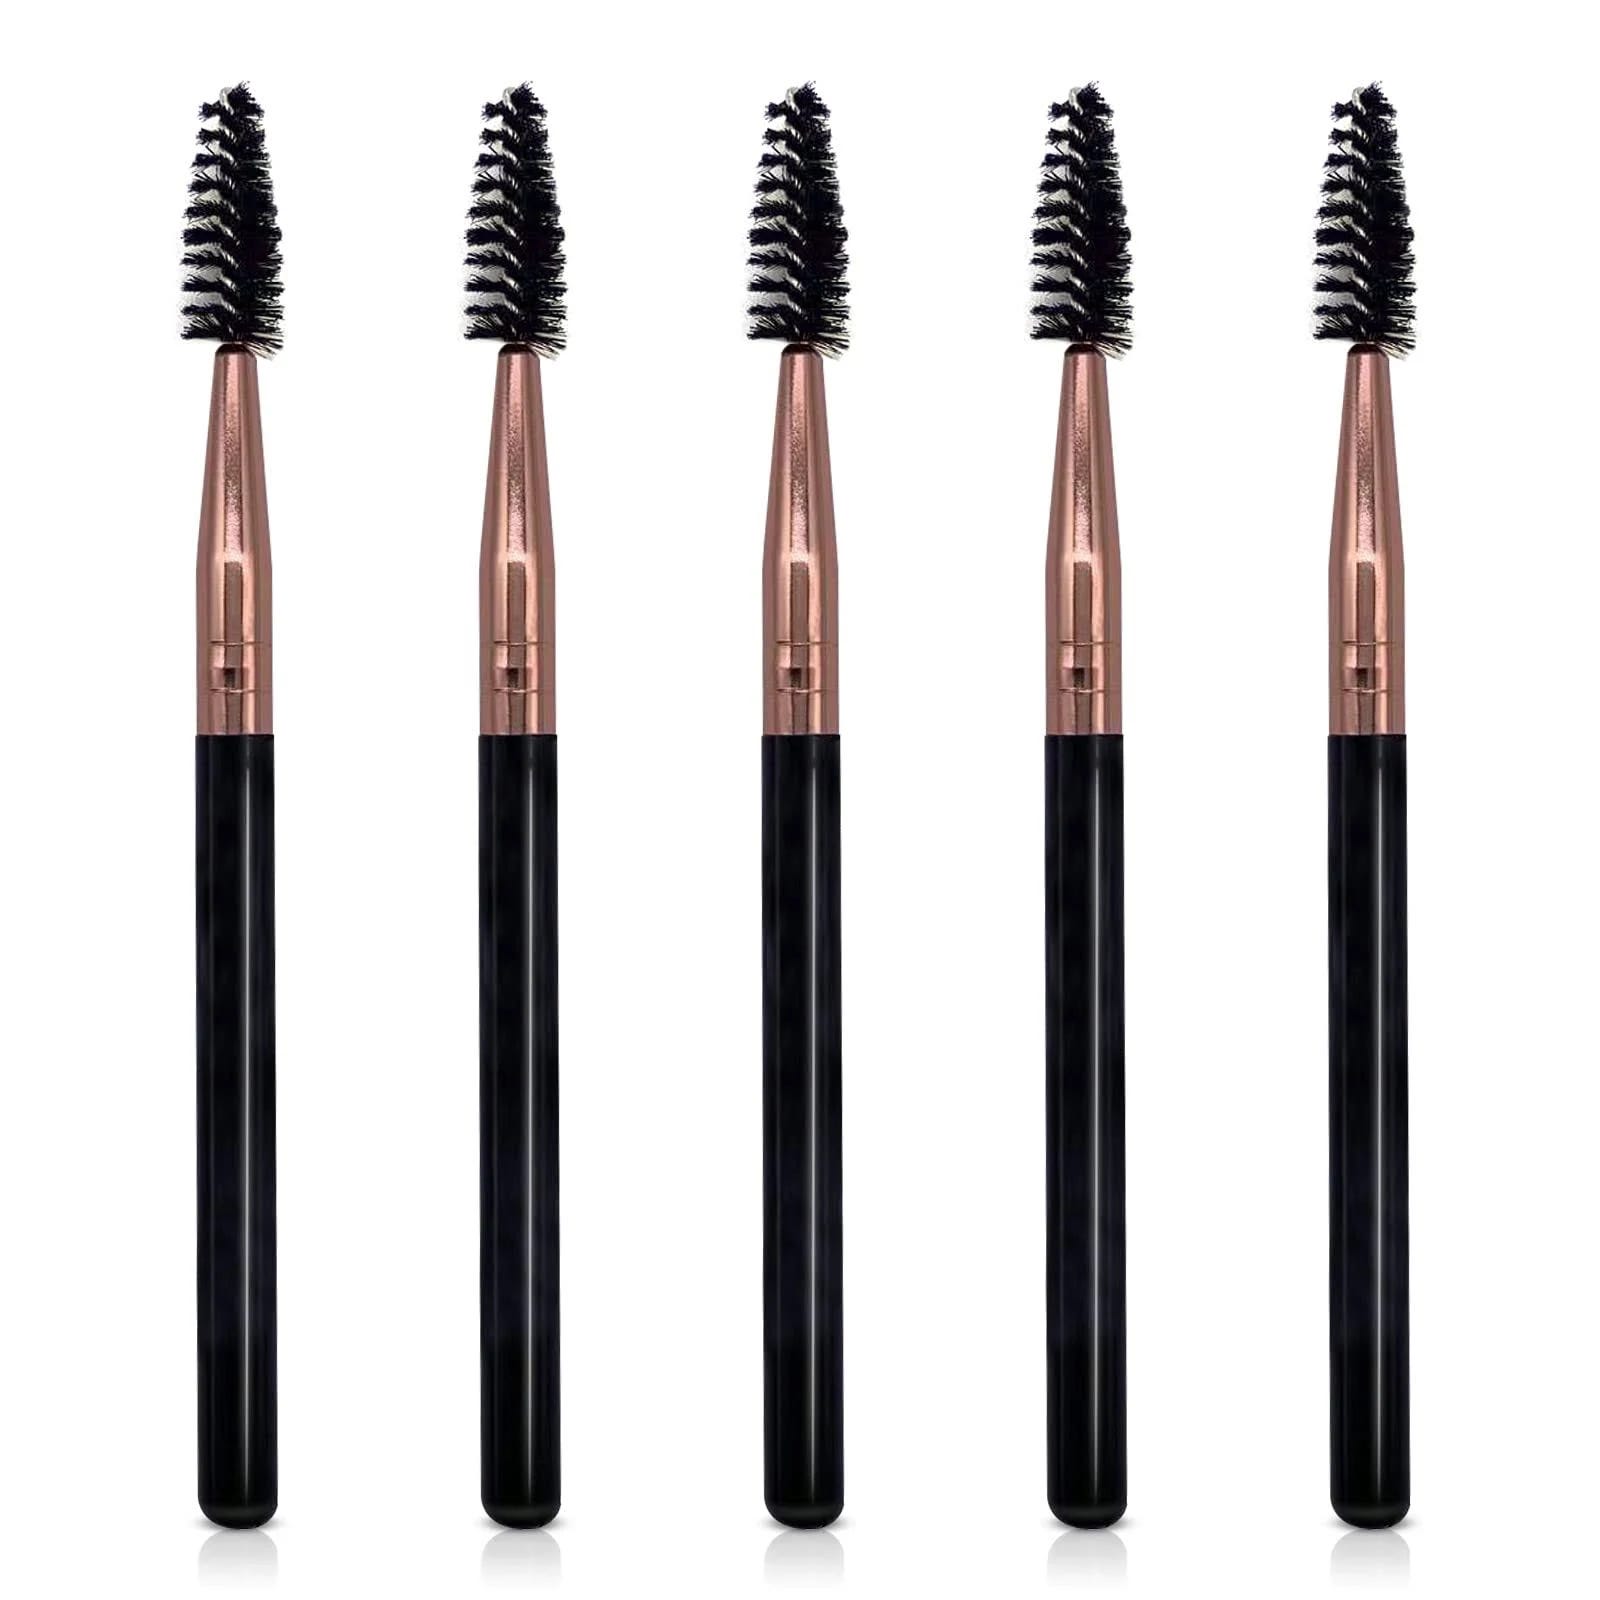 UorPoto Eyelash Brush Wands Set with 5pcs Spoolies for Makeup and Extensions | Image